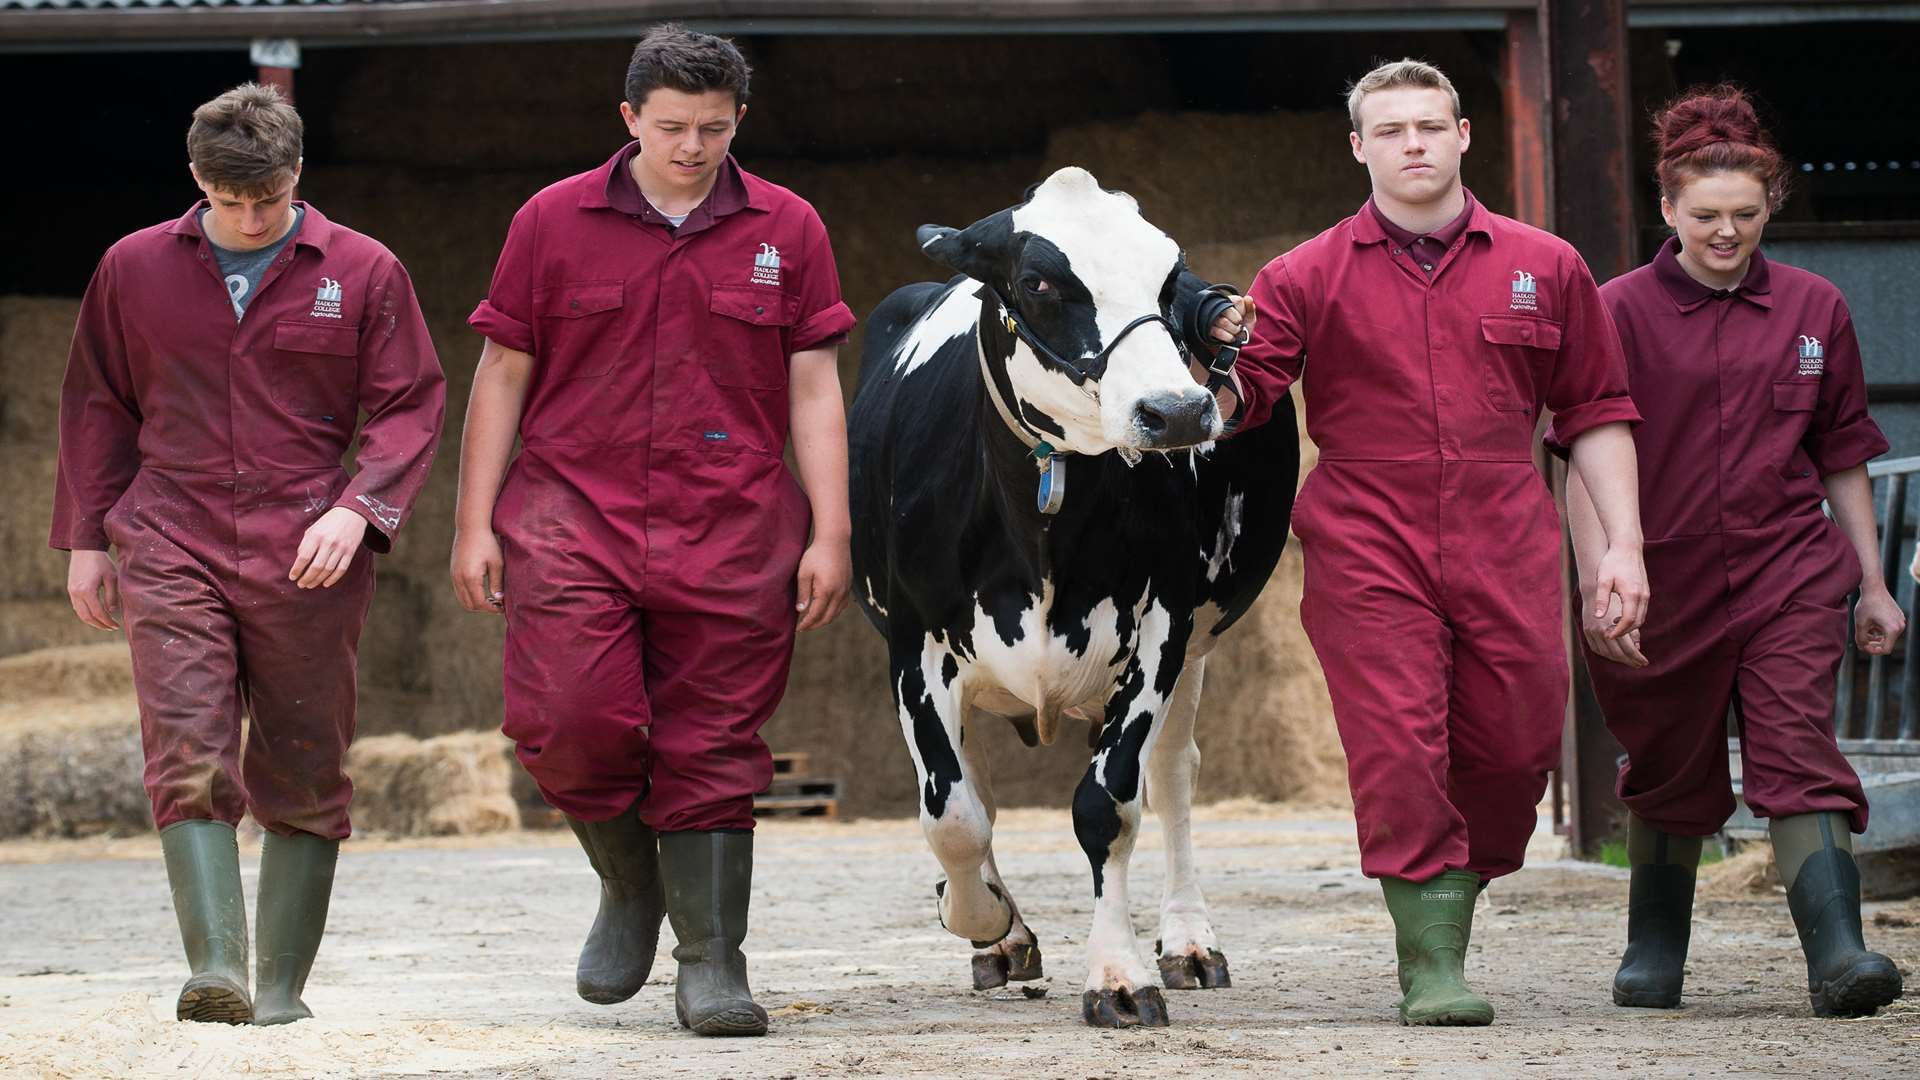 Hadlow College offers Foundation degrees in animal conservation and biodiversity, applied animal behavioural science and welfare, aquaculture and fisheries management, equine training and management, commercial horticulture and landscape and countryside management